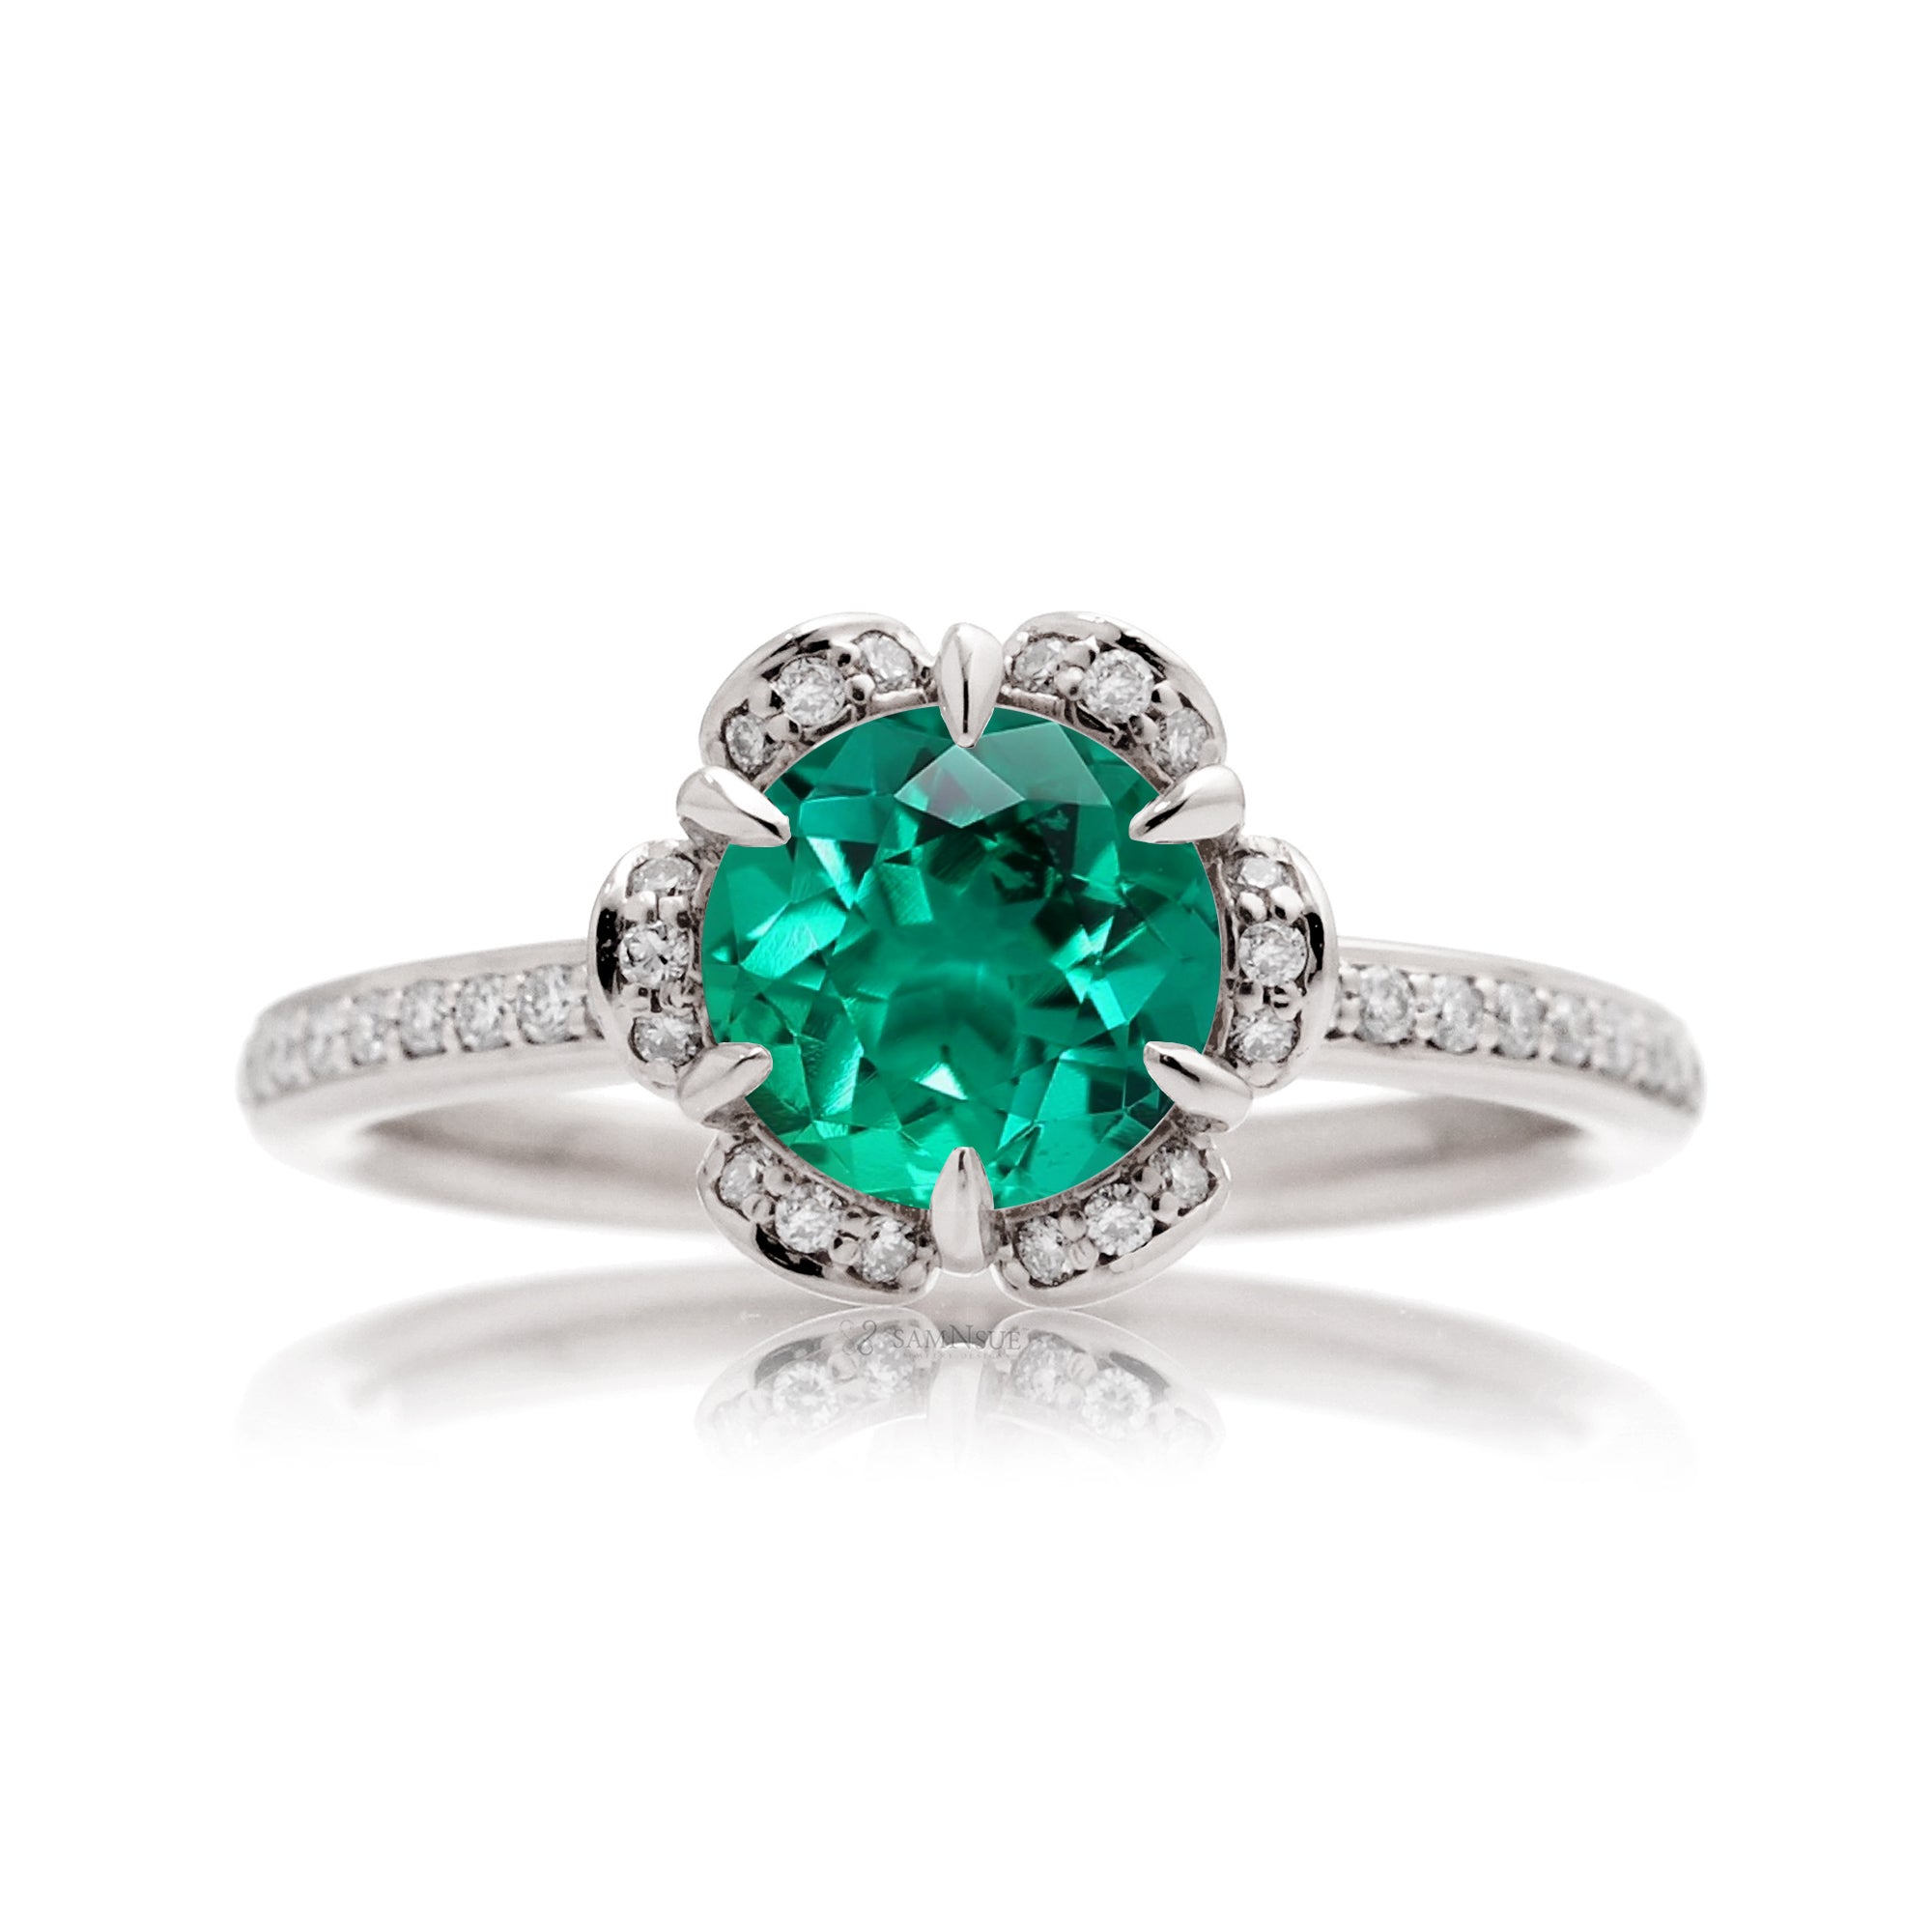 Floral lab-grown emerald engagement ring white gold